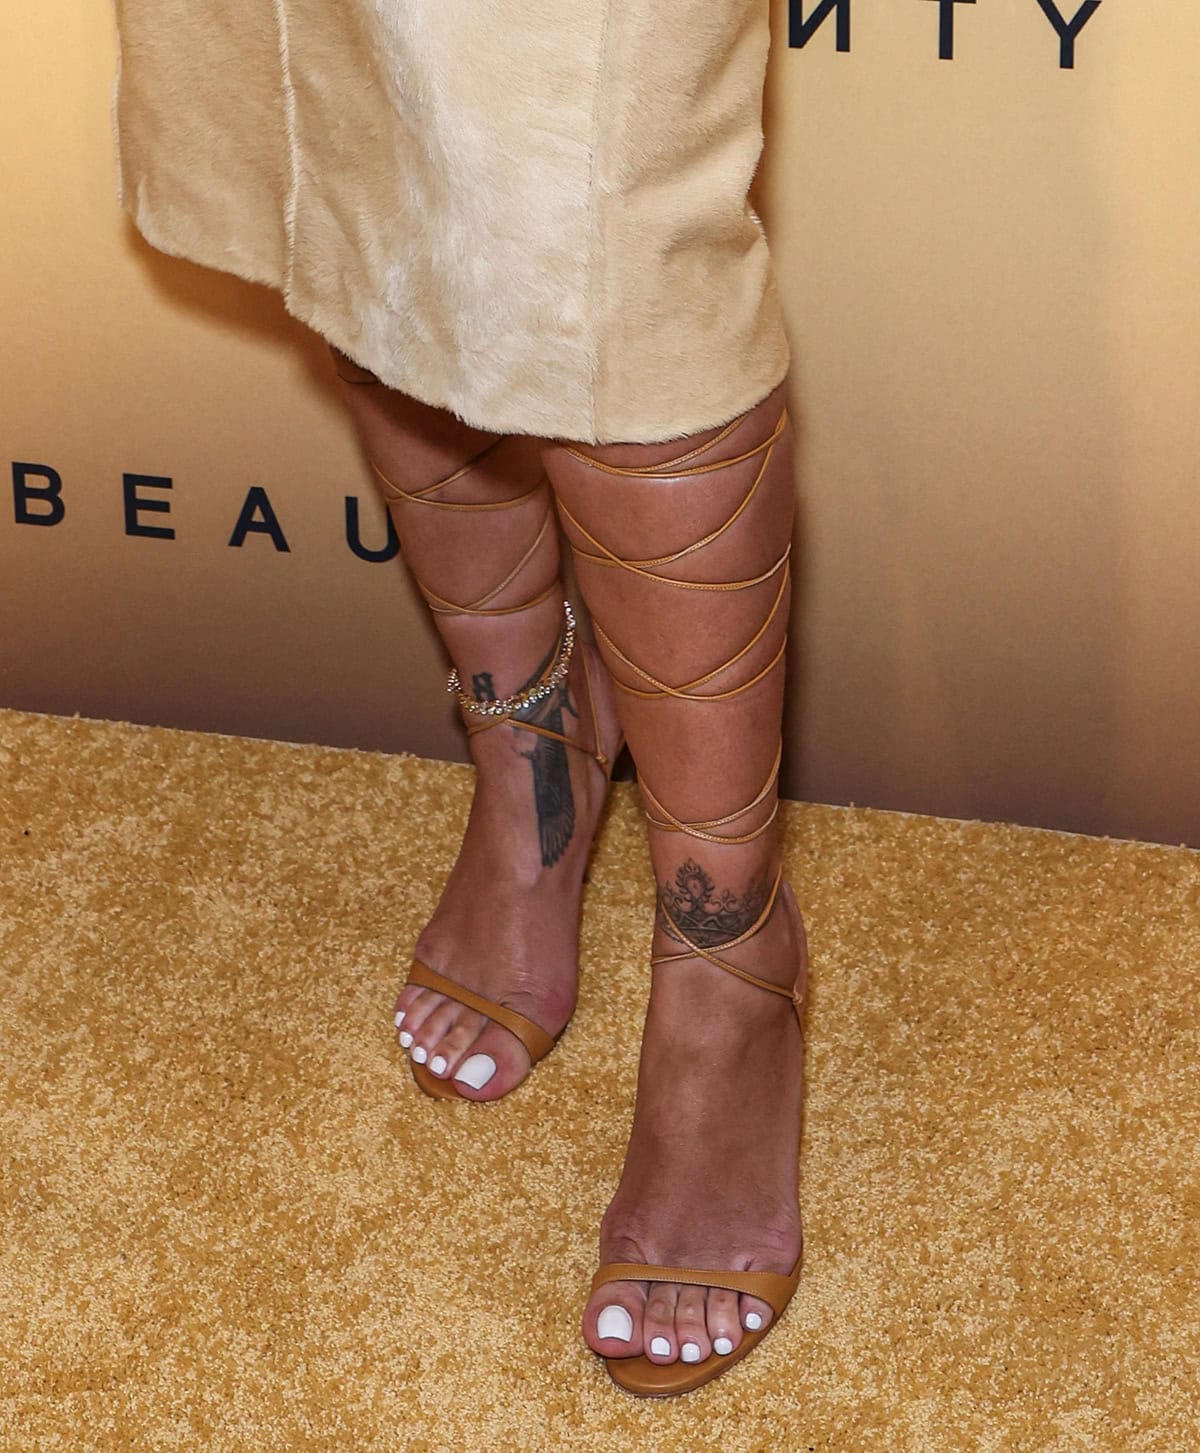 Rihanna slips her white-pedicured feet into a pair of tan gladiator sandals with thin wraparound lace-up straps and high heels